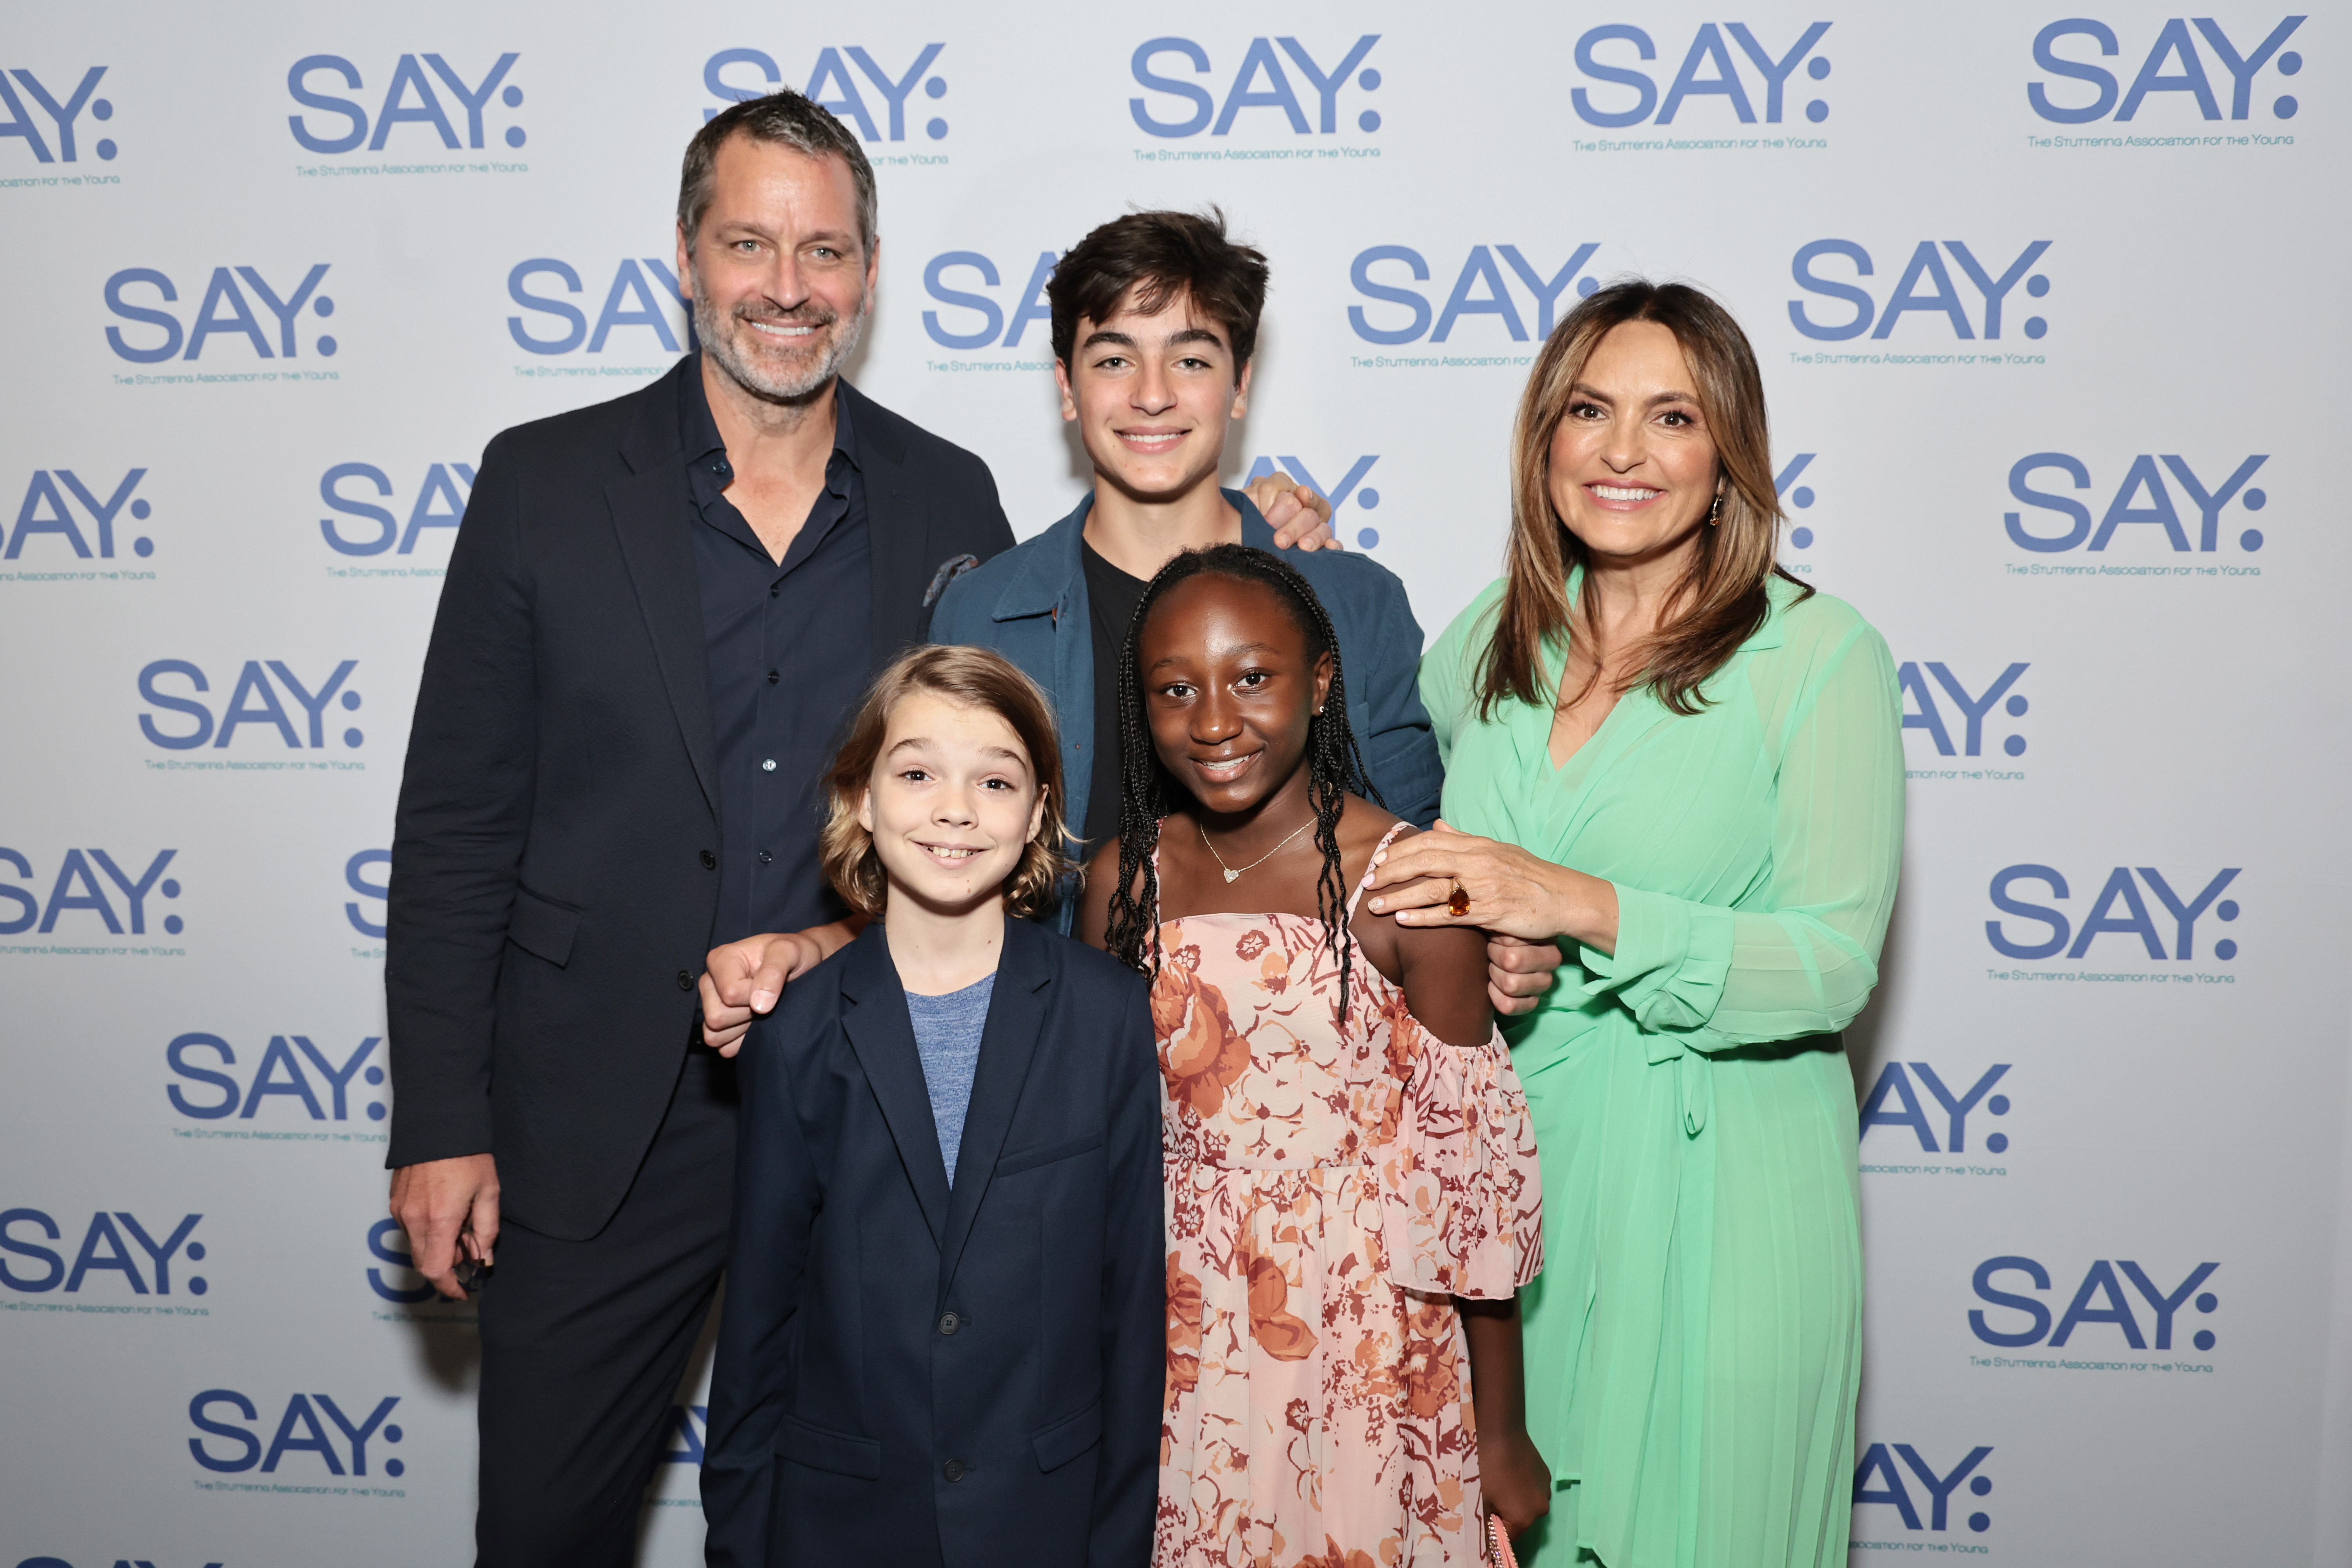 Peter Hermann and Mariska Hargitay with their children, August, Andrew, and Amaya, at the Stuttering Association for the Young (SAY) Benefit Gala in New York City on May 22, 2023 | Source: Getty Images